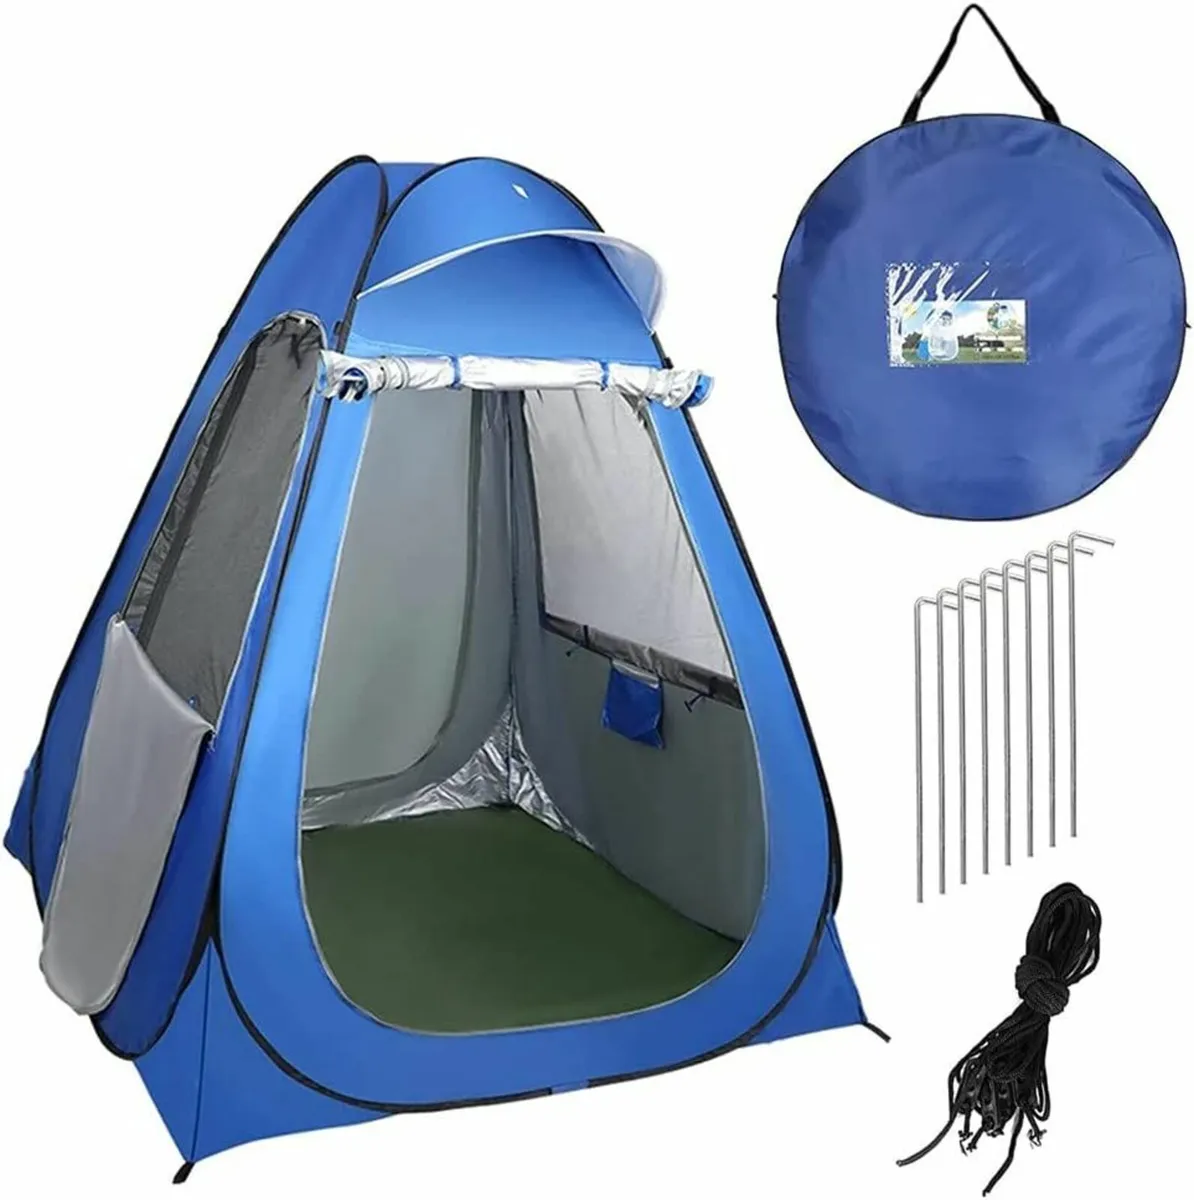 tent camping shower up pop portable for outdoor toilet changing bathroom privacy accessories screen camp tents pod room potty camper floor tanning restroom with popup - Image 1